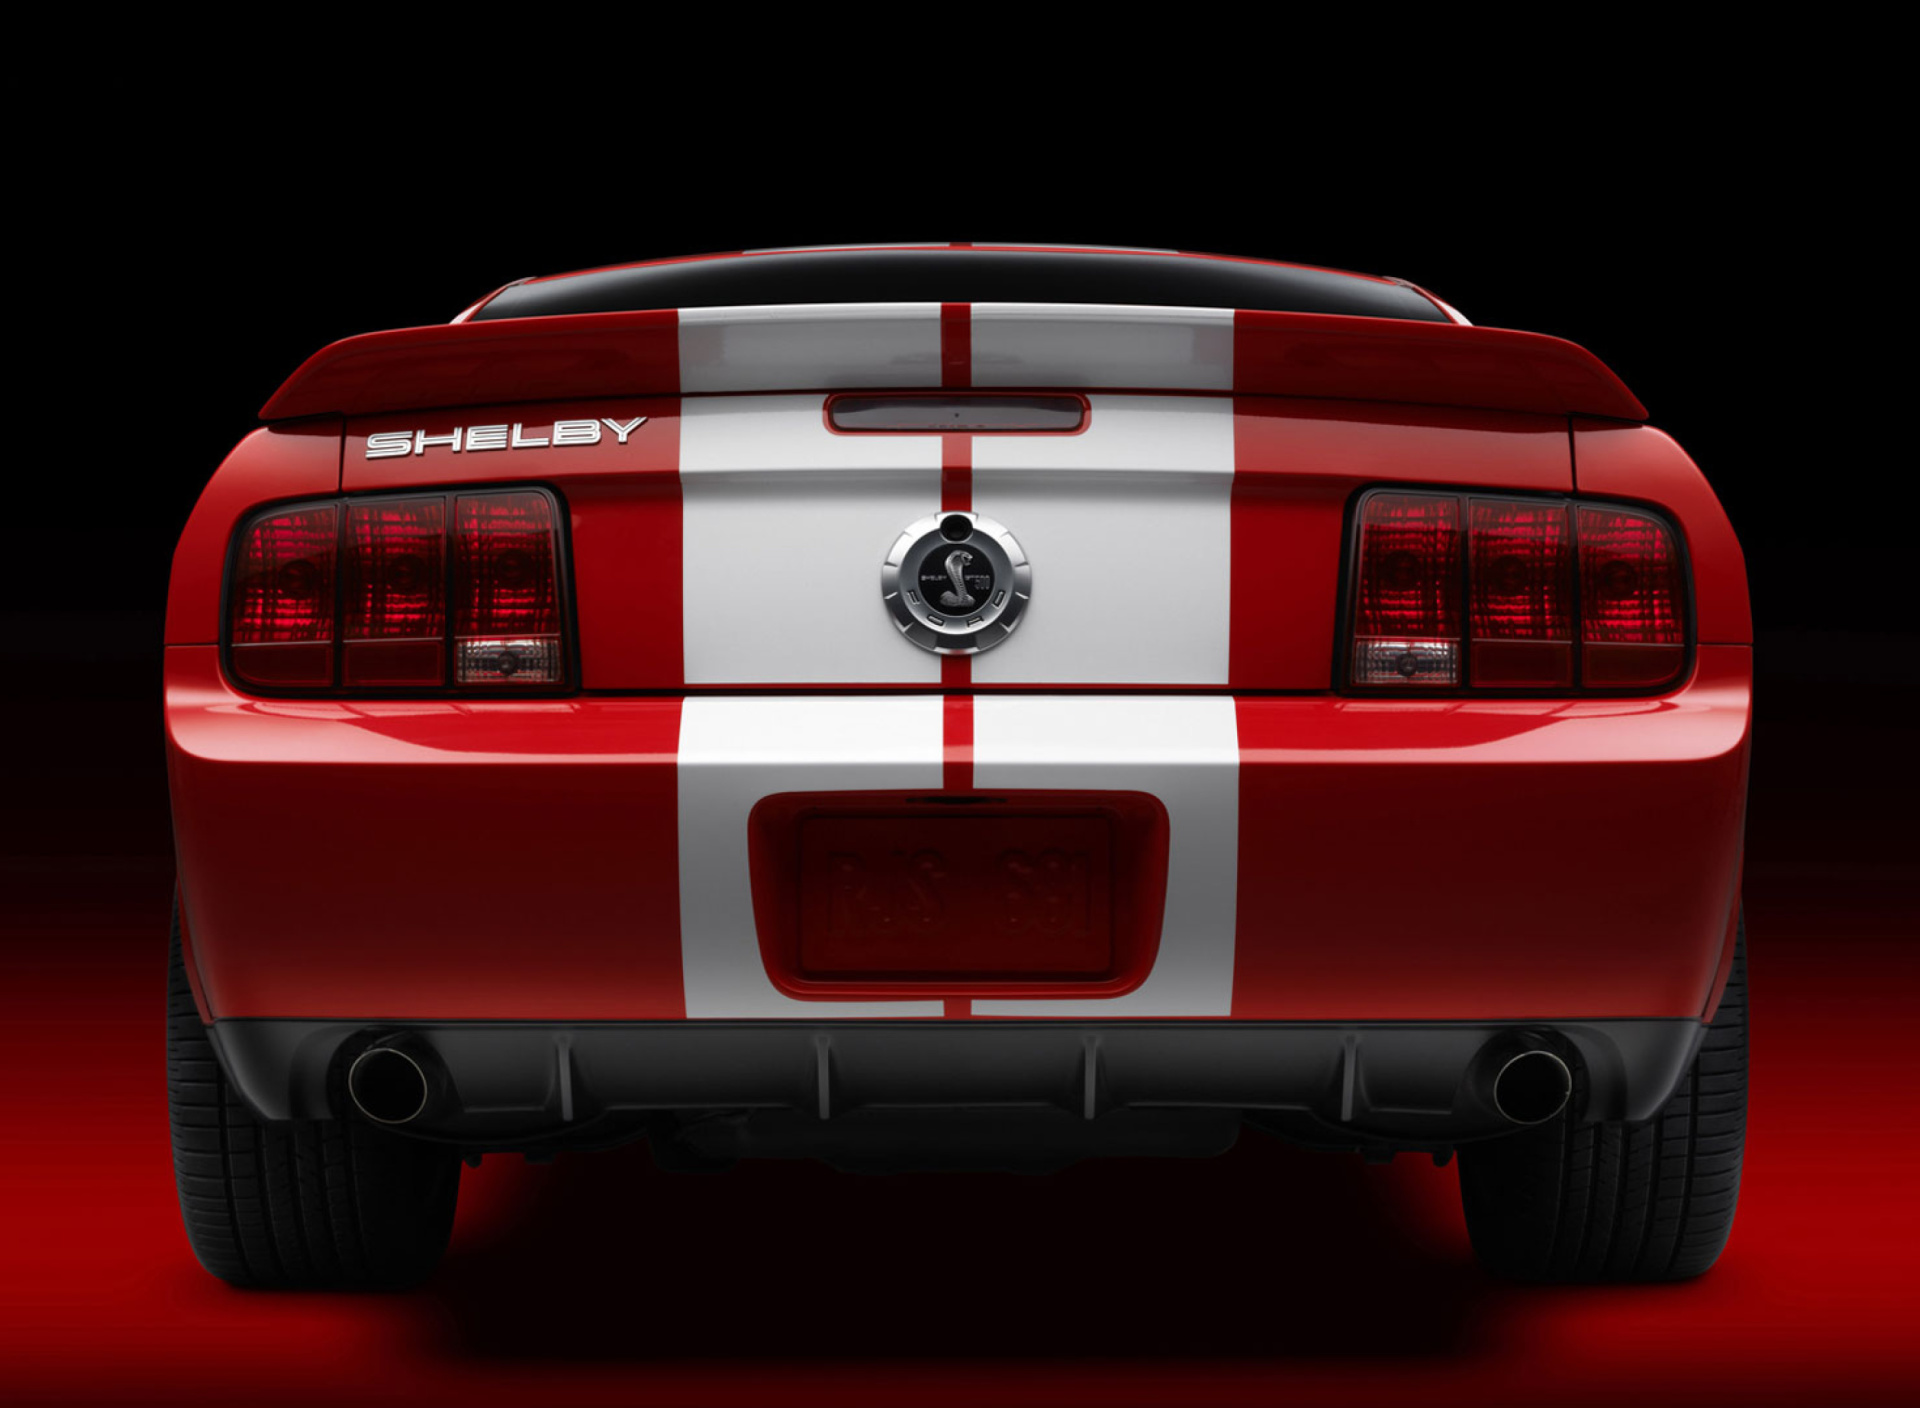 Ford Mustang Shelby GT500 wallpaper 1920x1408